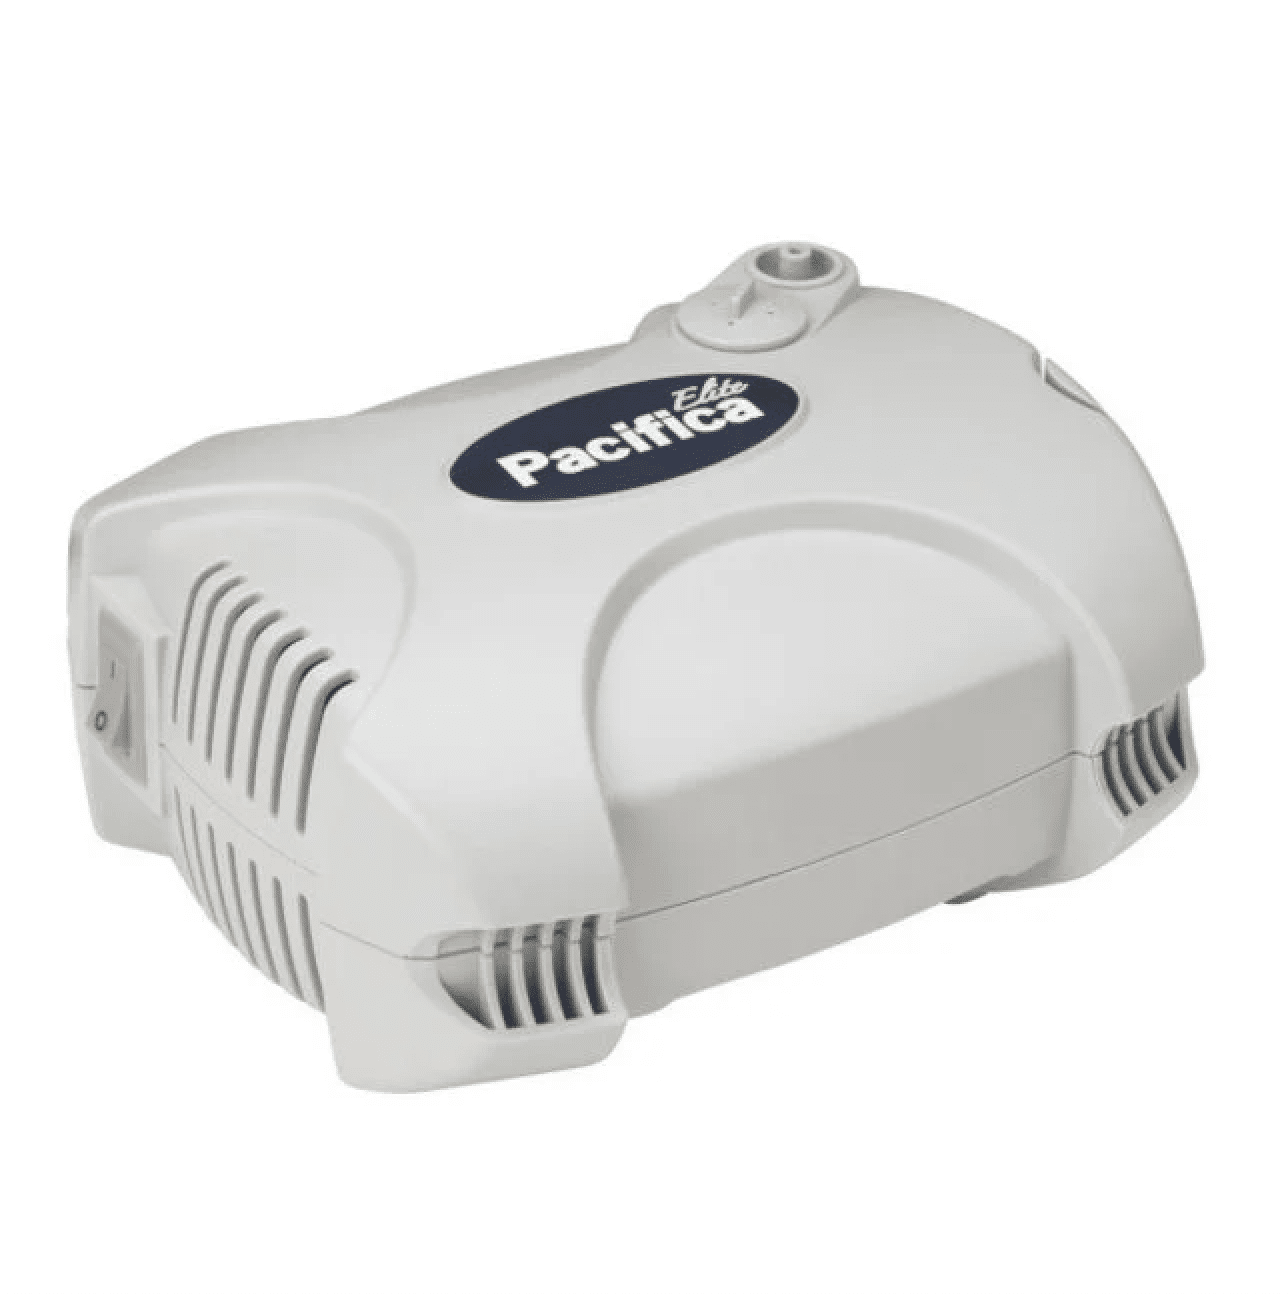 Basic adult nebulizer affordable and same day